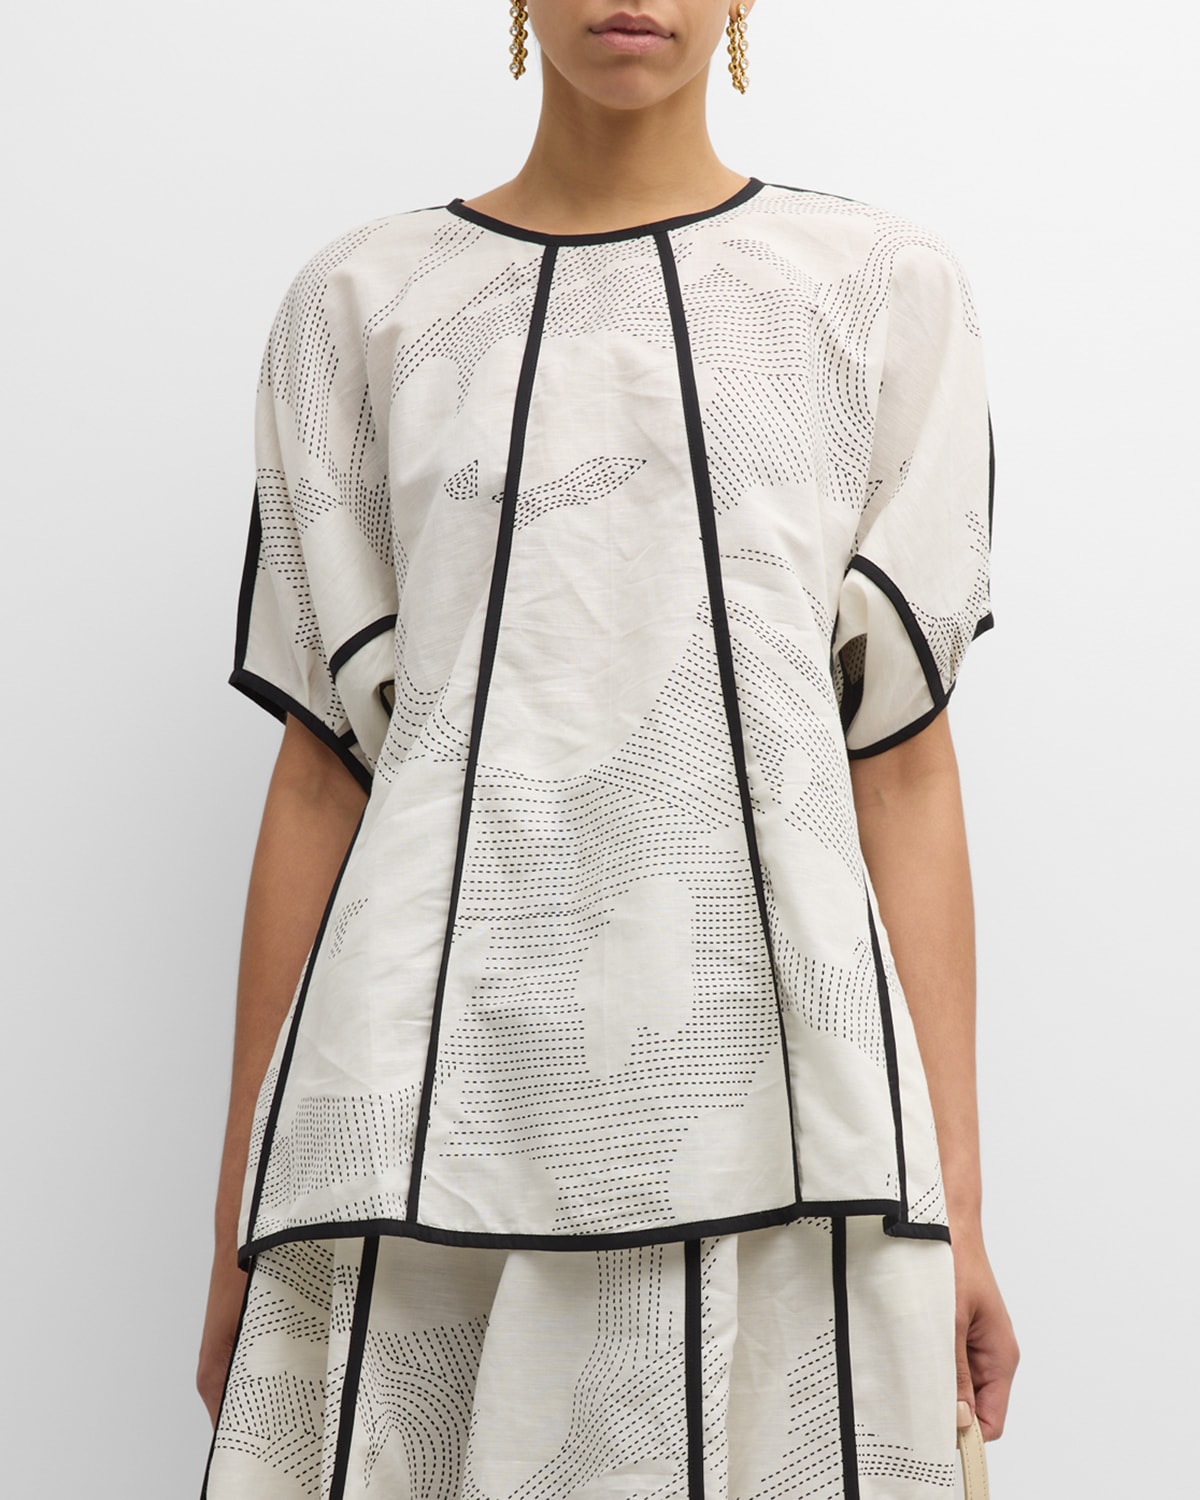 Lovebirds Chiaroscuro Printed Seamed Top In Ivory